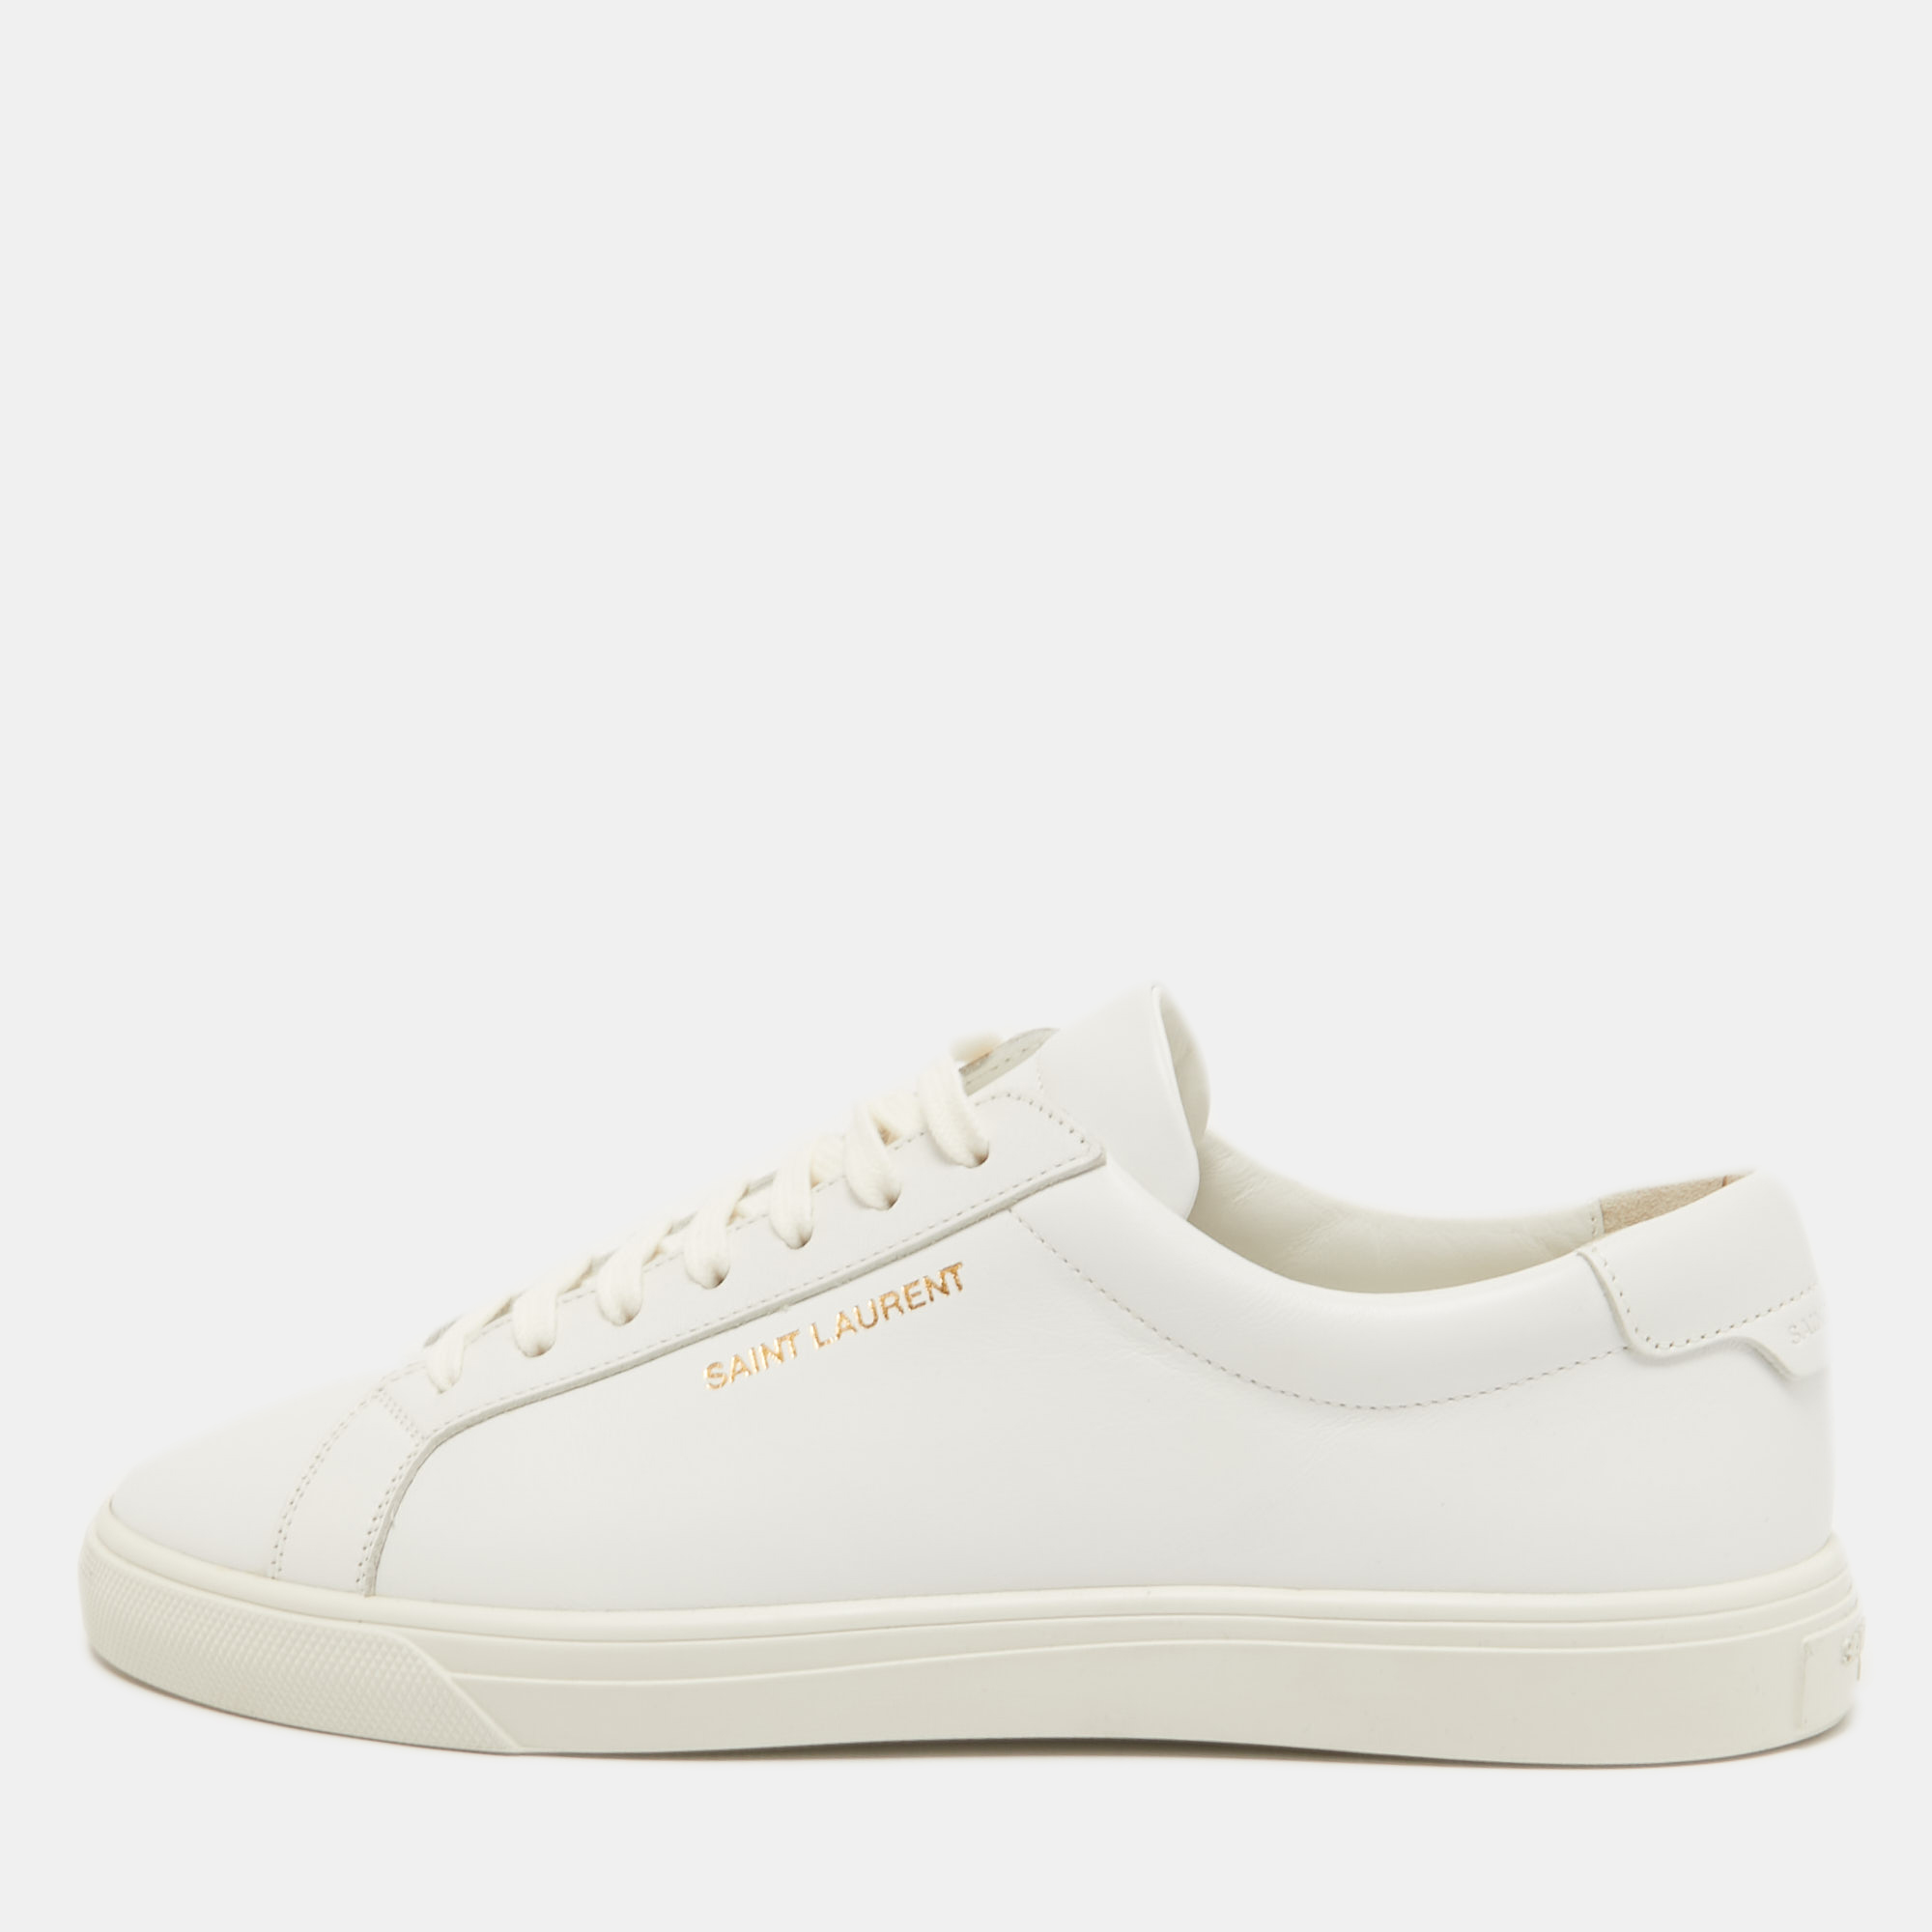 Pre-owned Saint Laurent White Leather Andy Sneakers Size 37.5